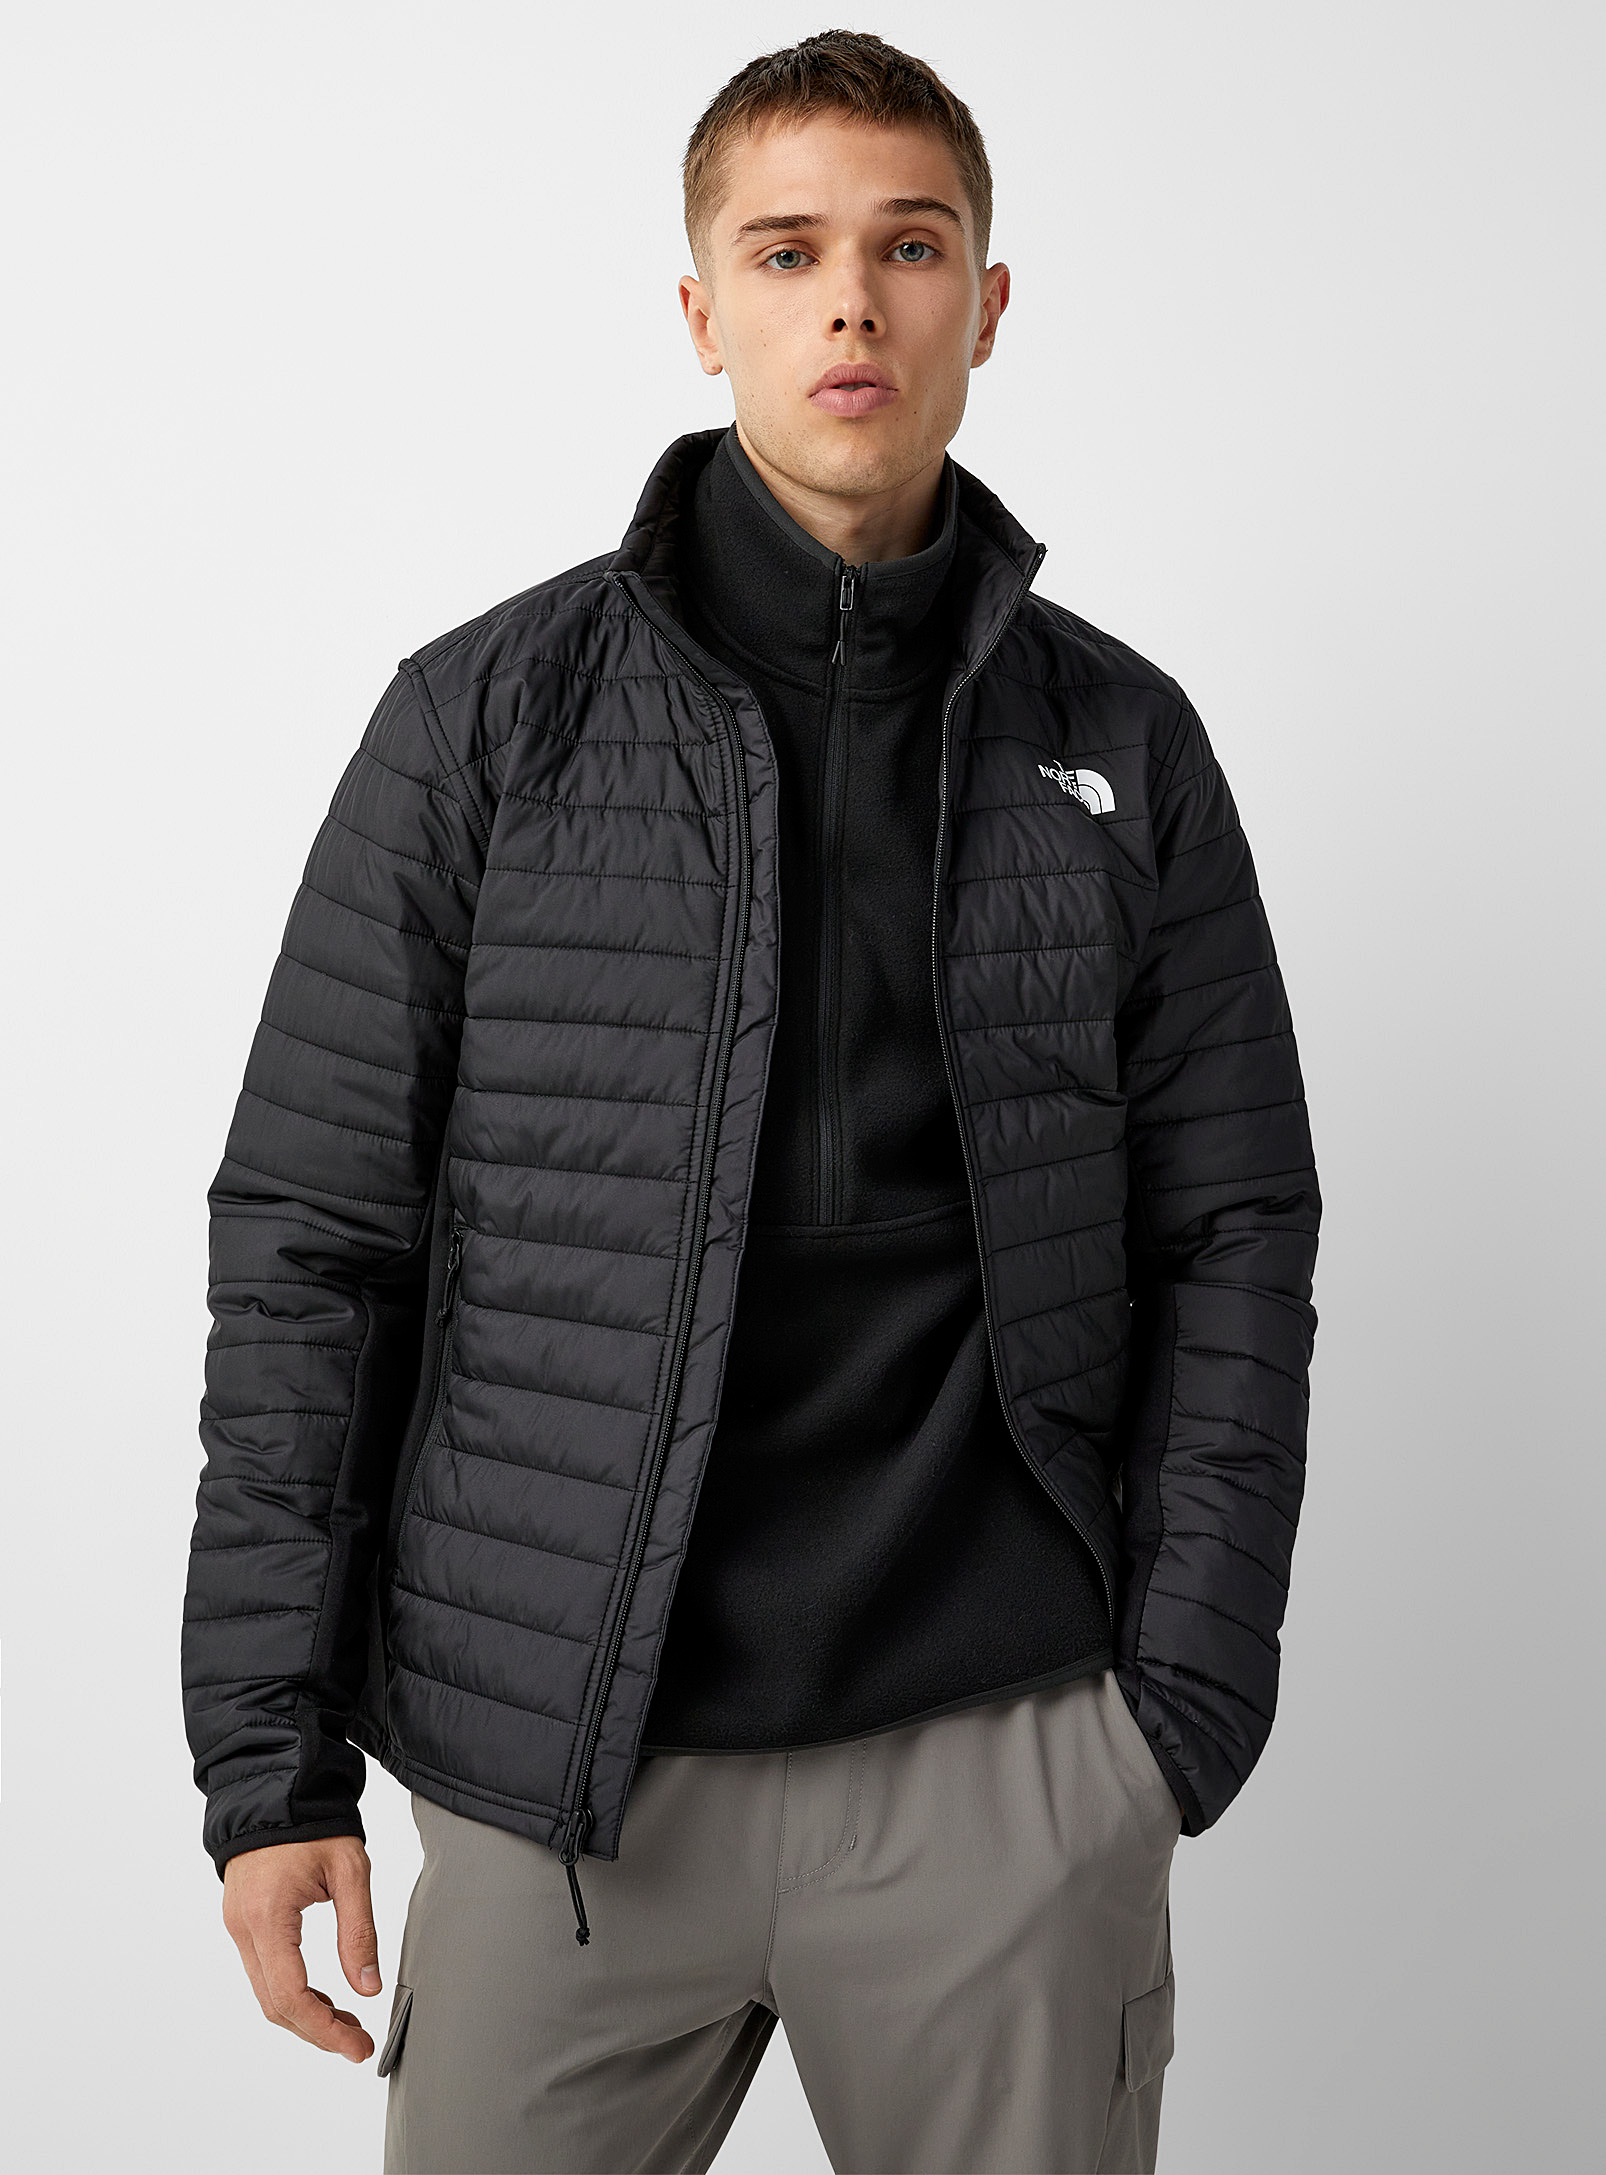 THE NORTH FACE HYBRID CANYONLANDS JERSEY INSERT PUFFER JACKET